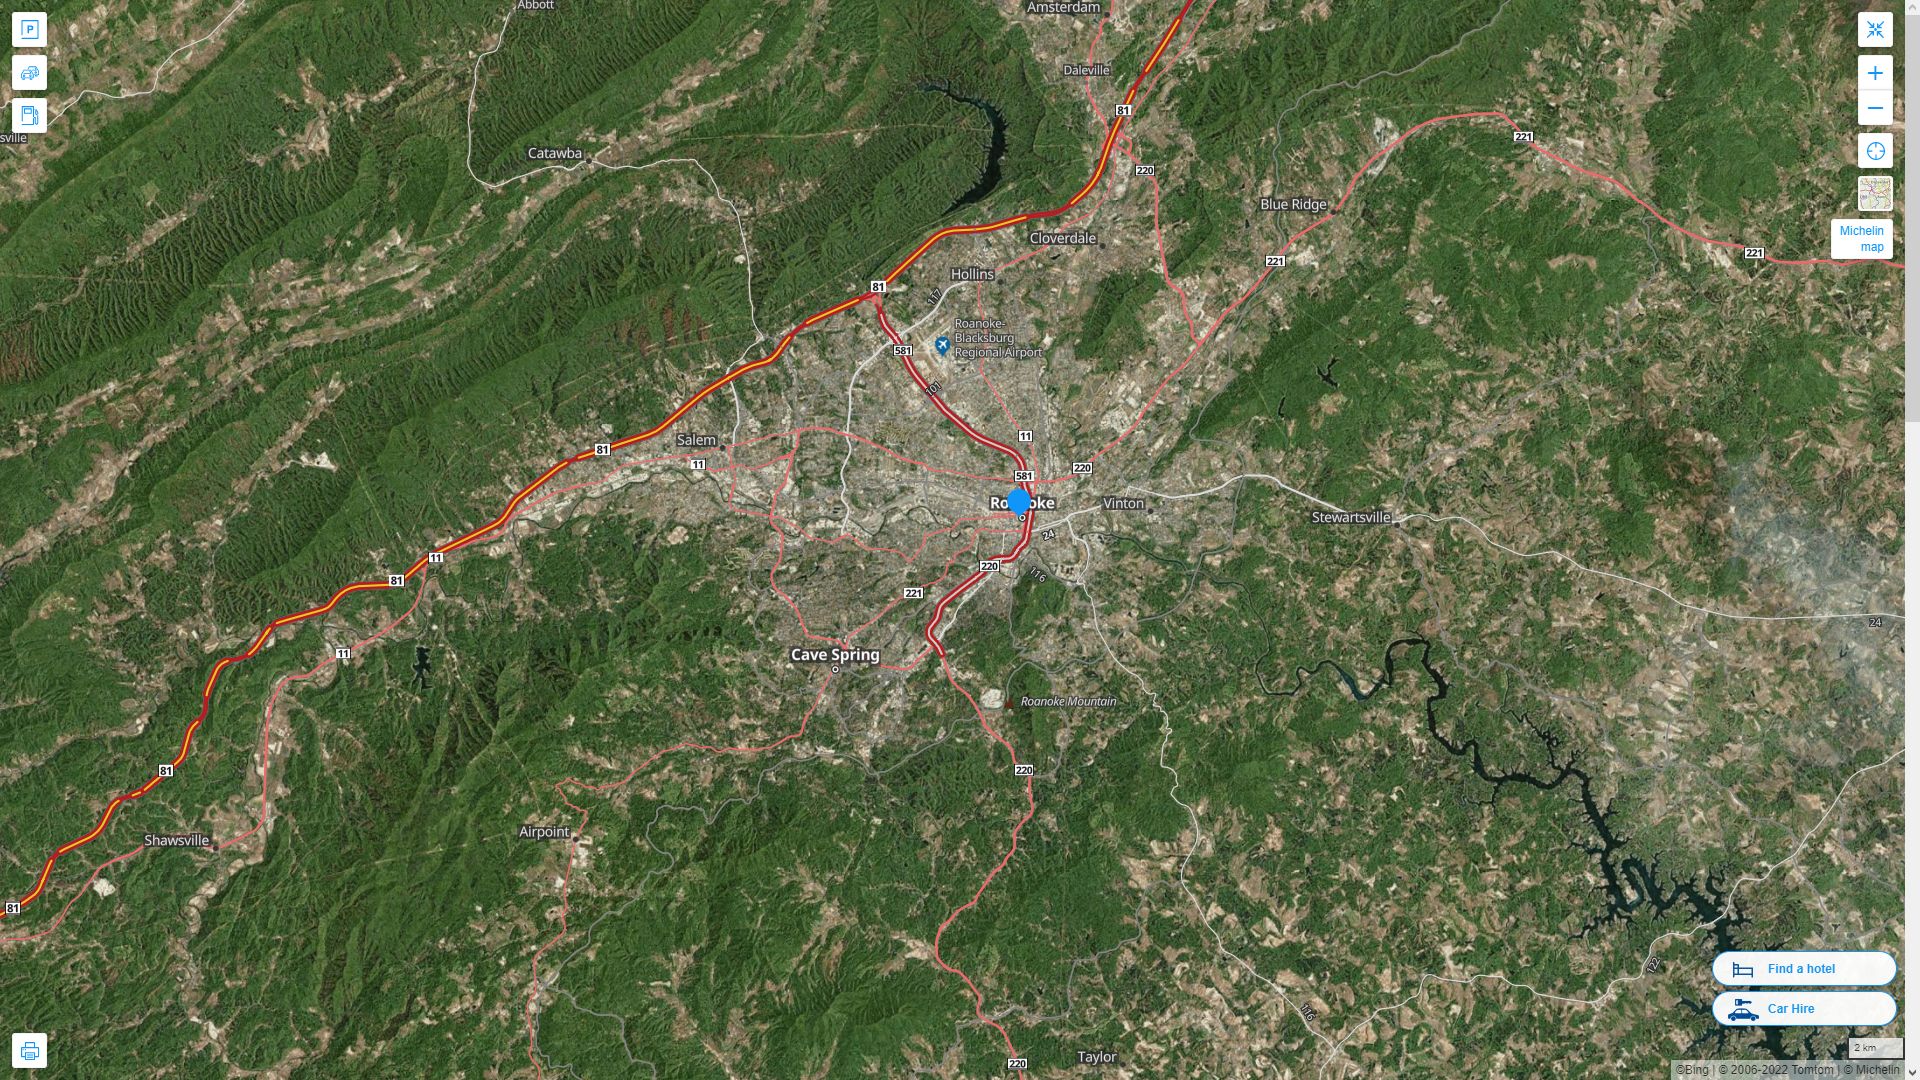 Roanoke Virginia Highway and Road Map with Satellite View